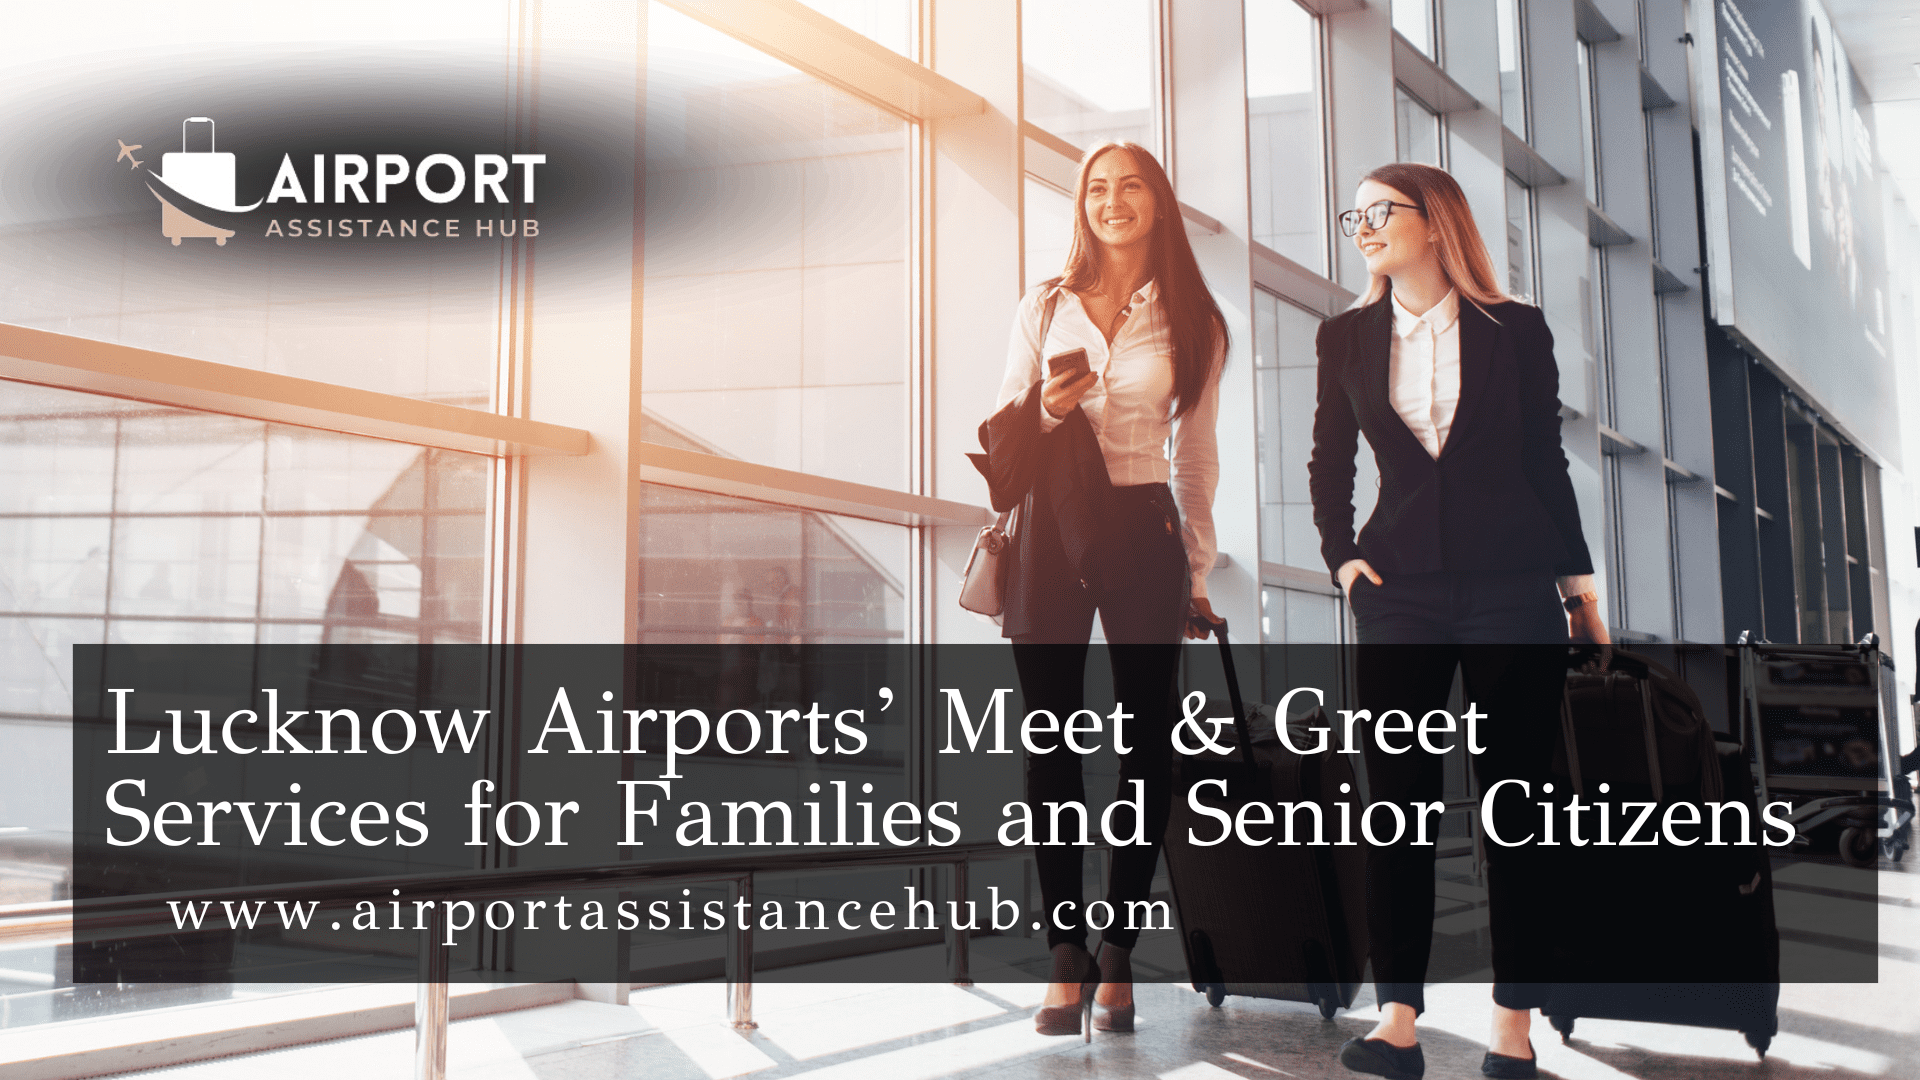 Lucknow Airport Meet & Greet Services for Families and Senior Citizens